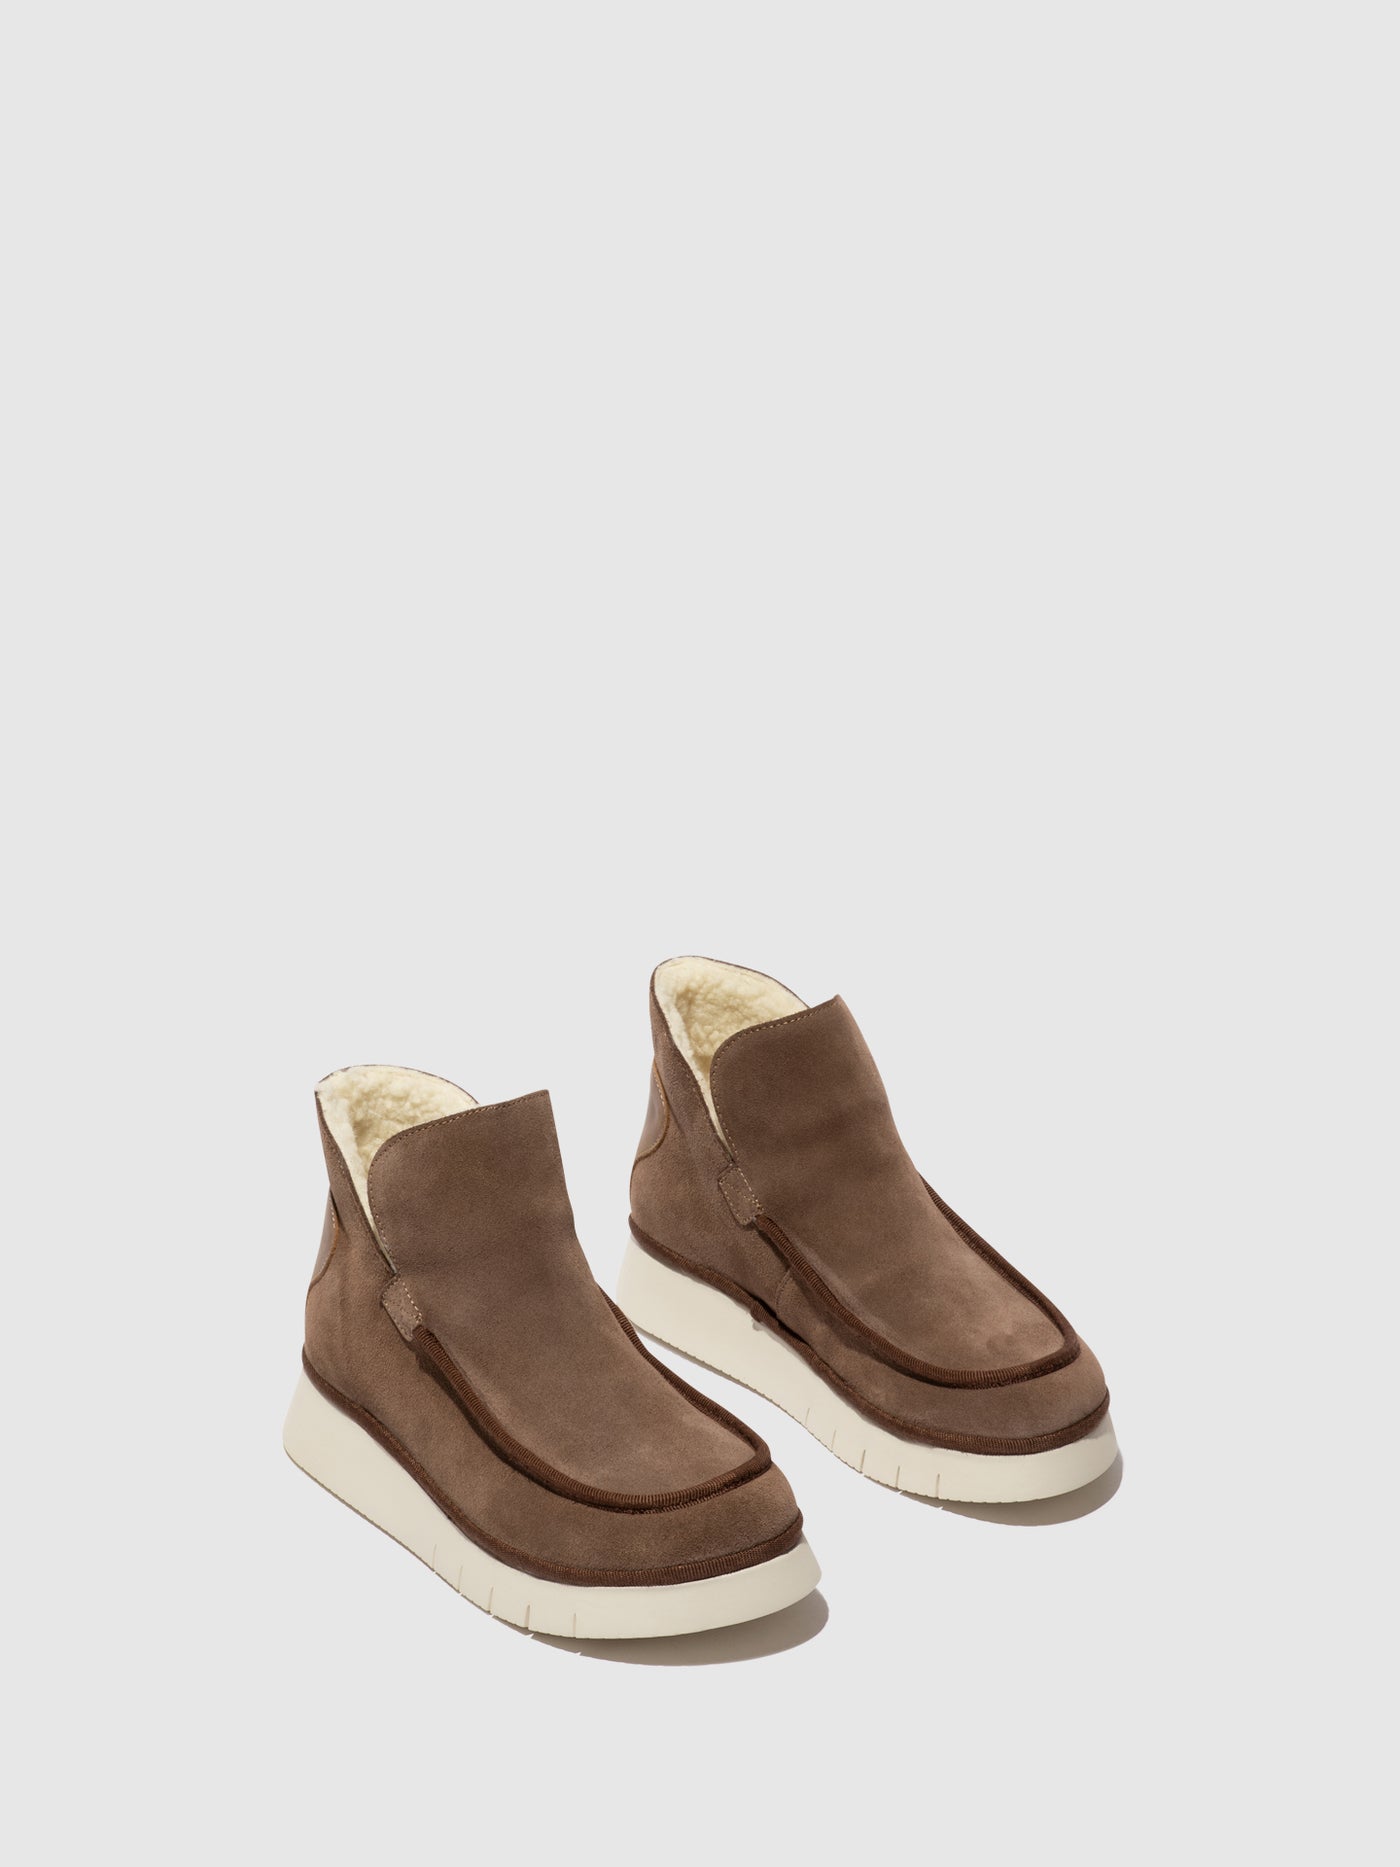 Round Toe Ankle Boots COZE348FLY TAUPE/CAMEL